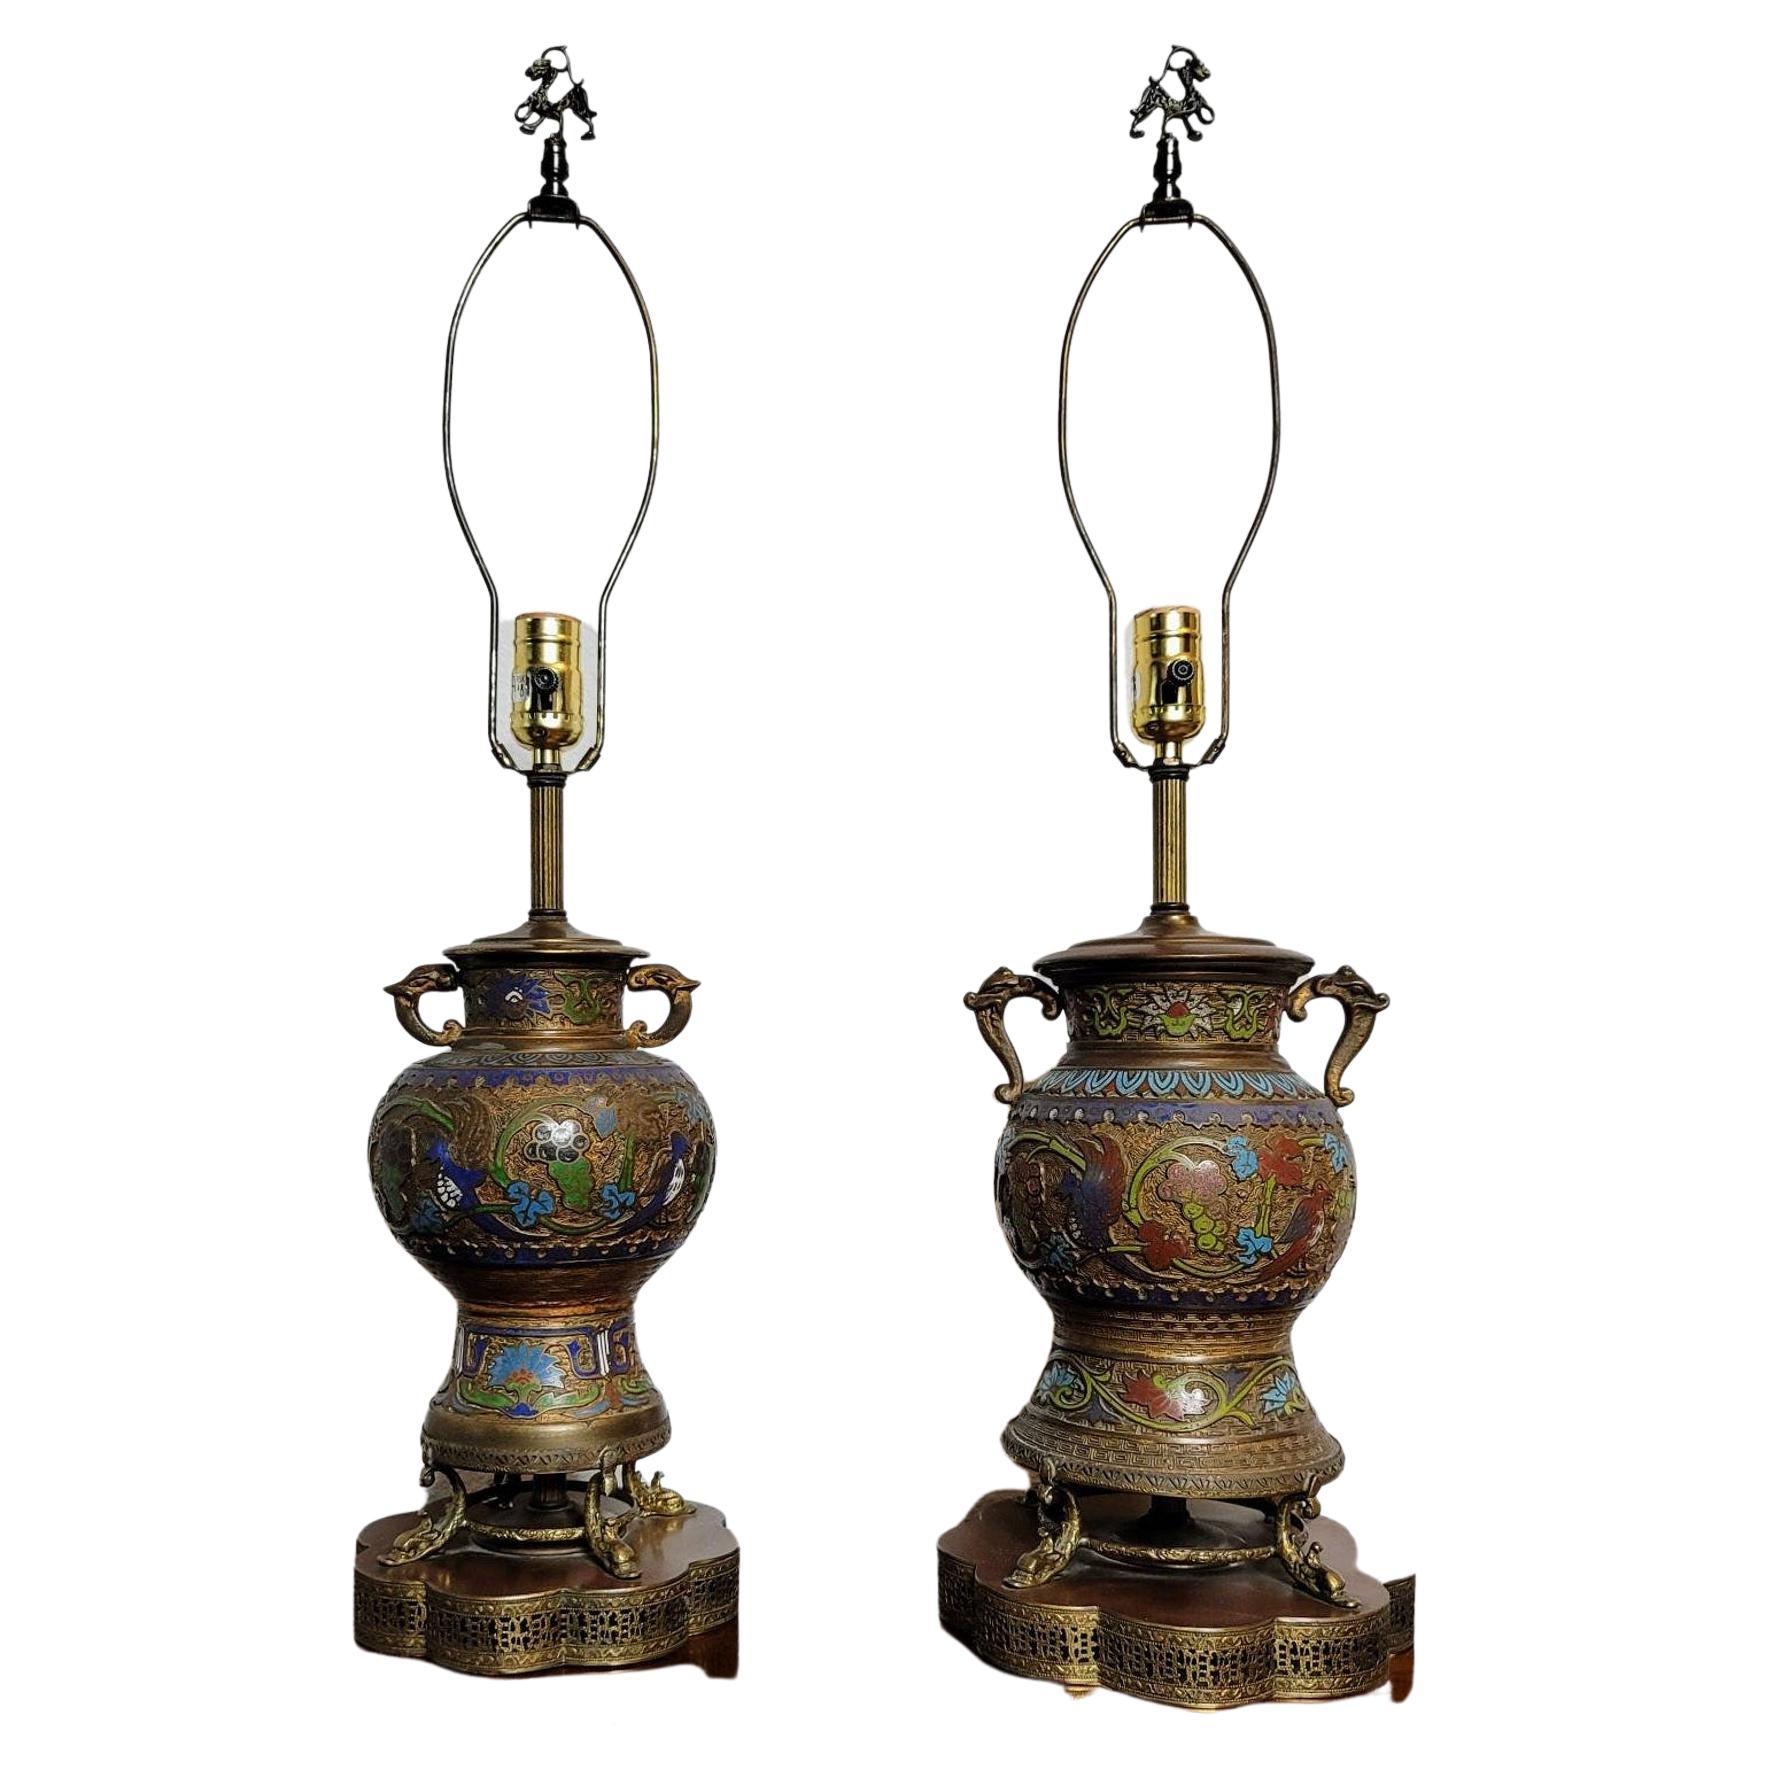 Pair of Antique Asian Champleve’ Enameled Bronze Urns Fashioned As Table Lamps For Sale